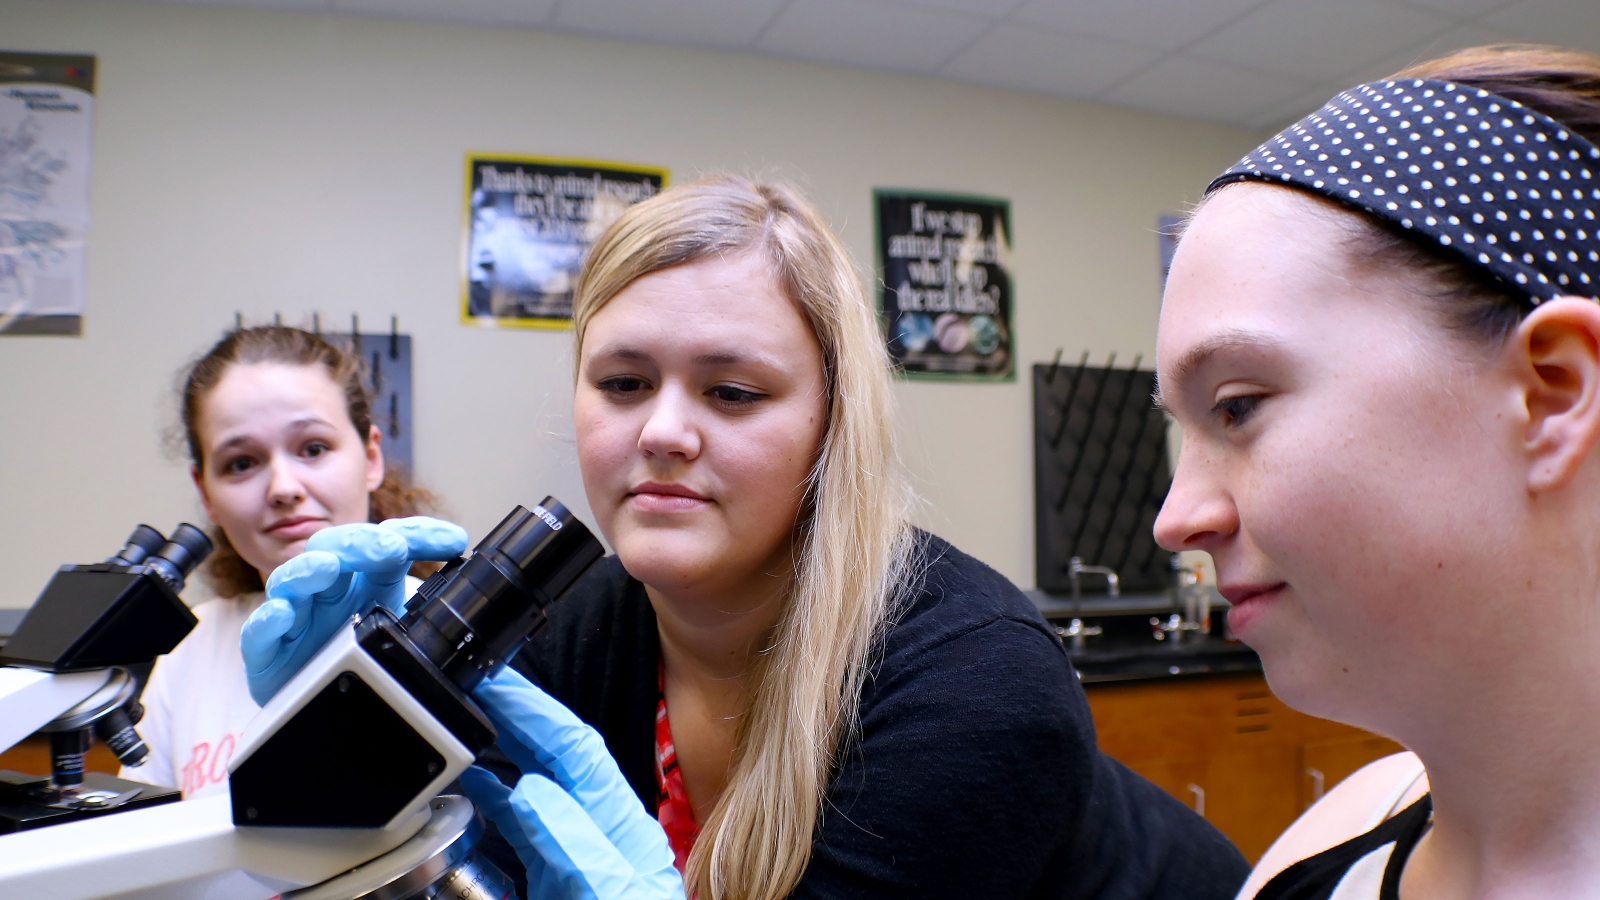 Two students looking through a microscope as another student looks on.